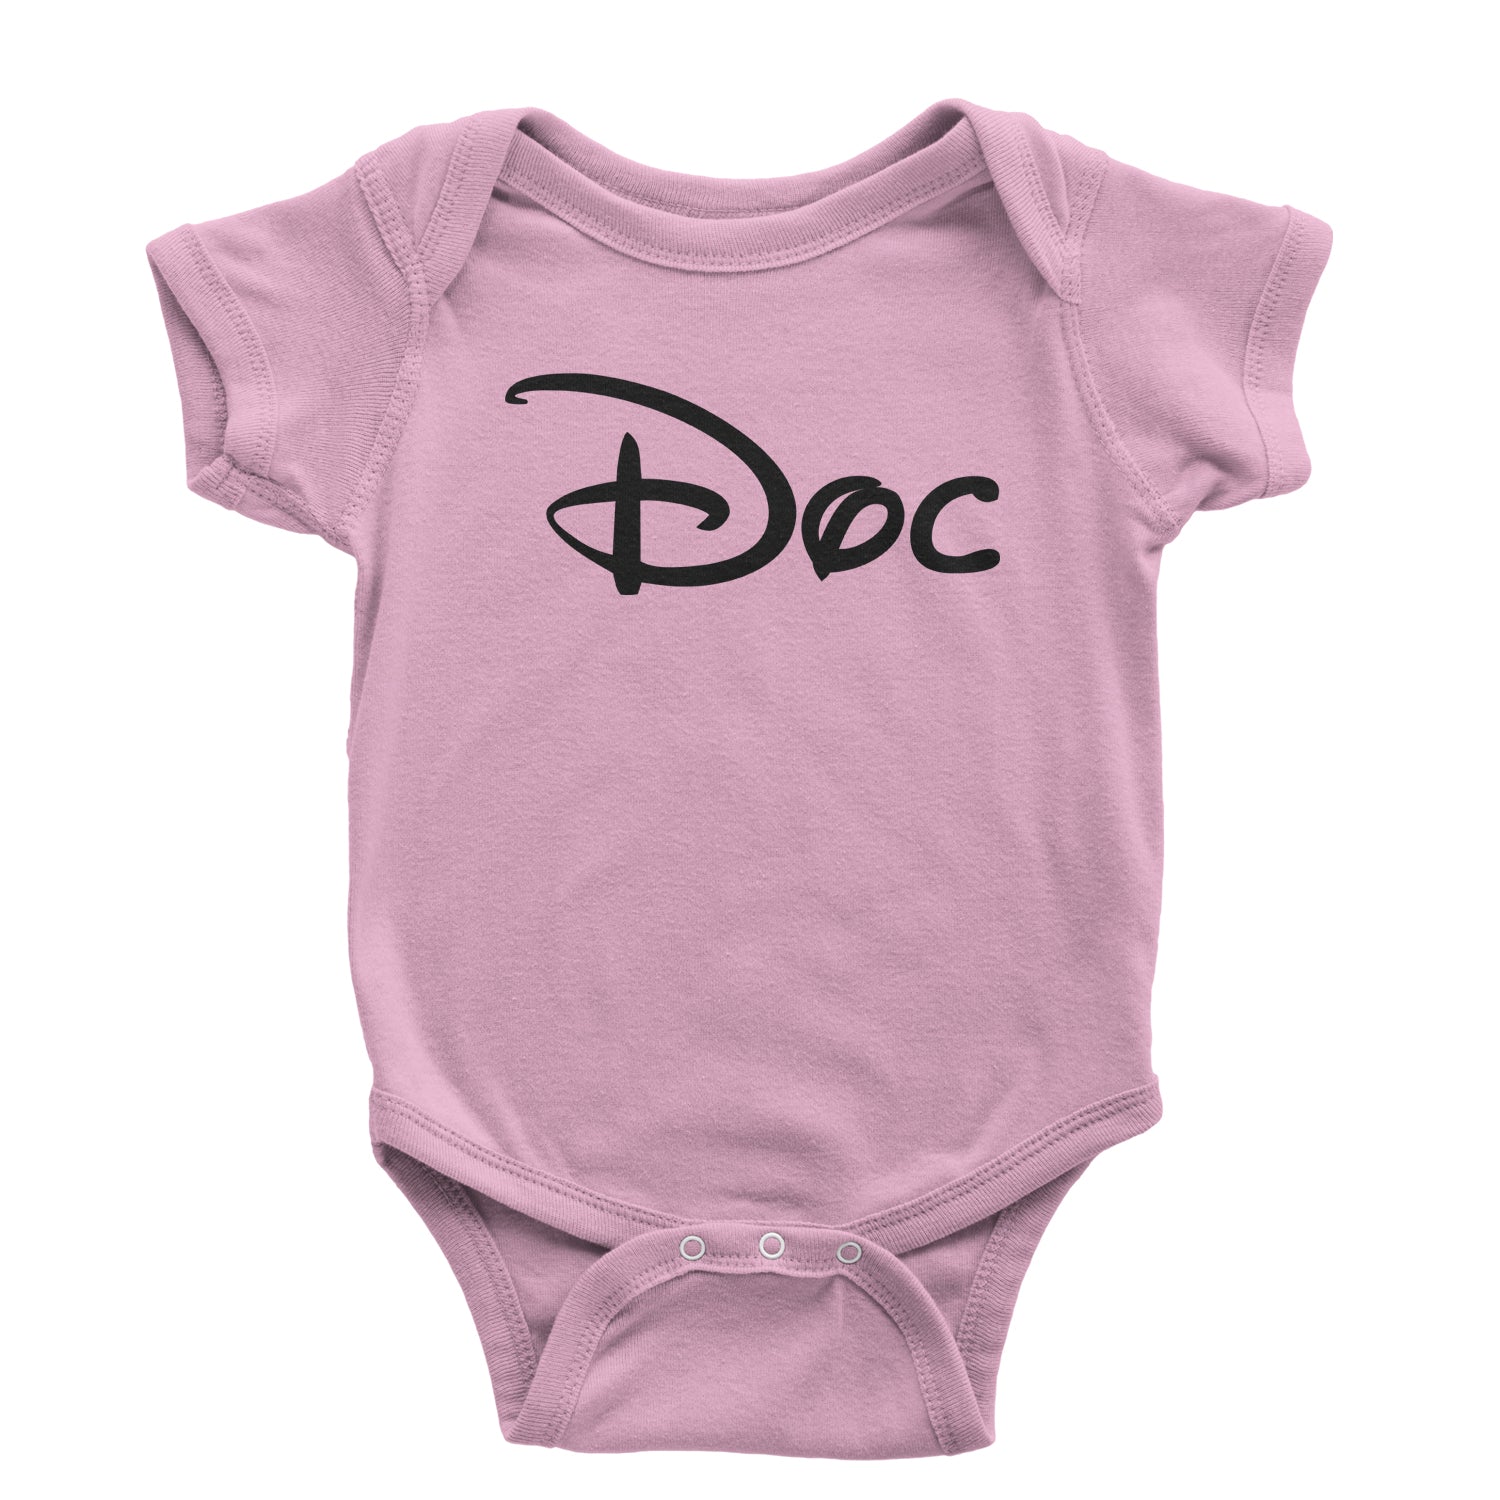 Doc - 7 Dwarfs Costume Infant One-Piece Romper Bodysuit and, costume, dwarfs, group, halloween, matching, seven, snow, the, white by Expression Tees